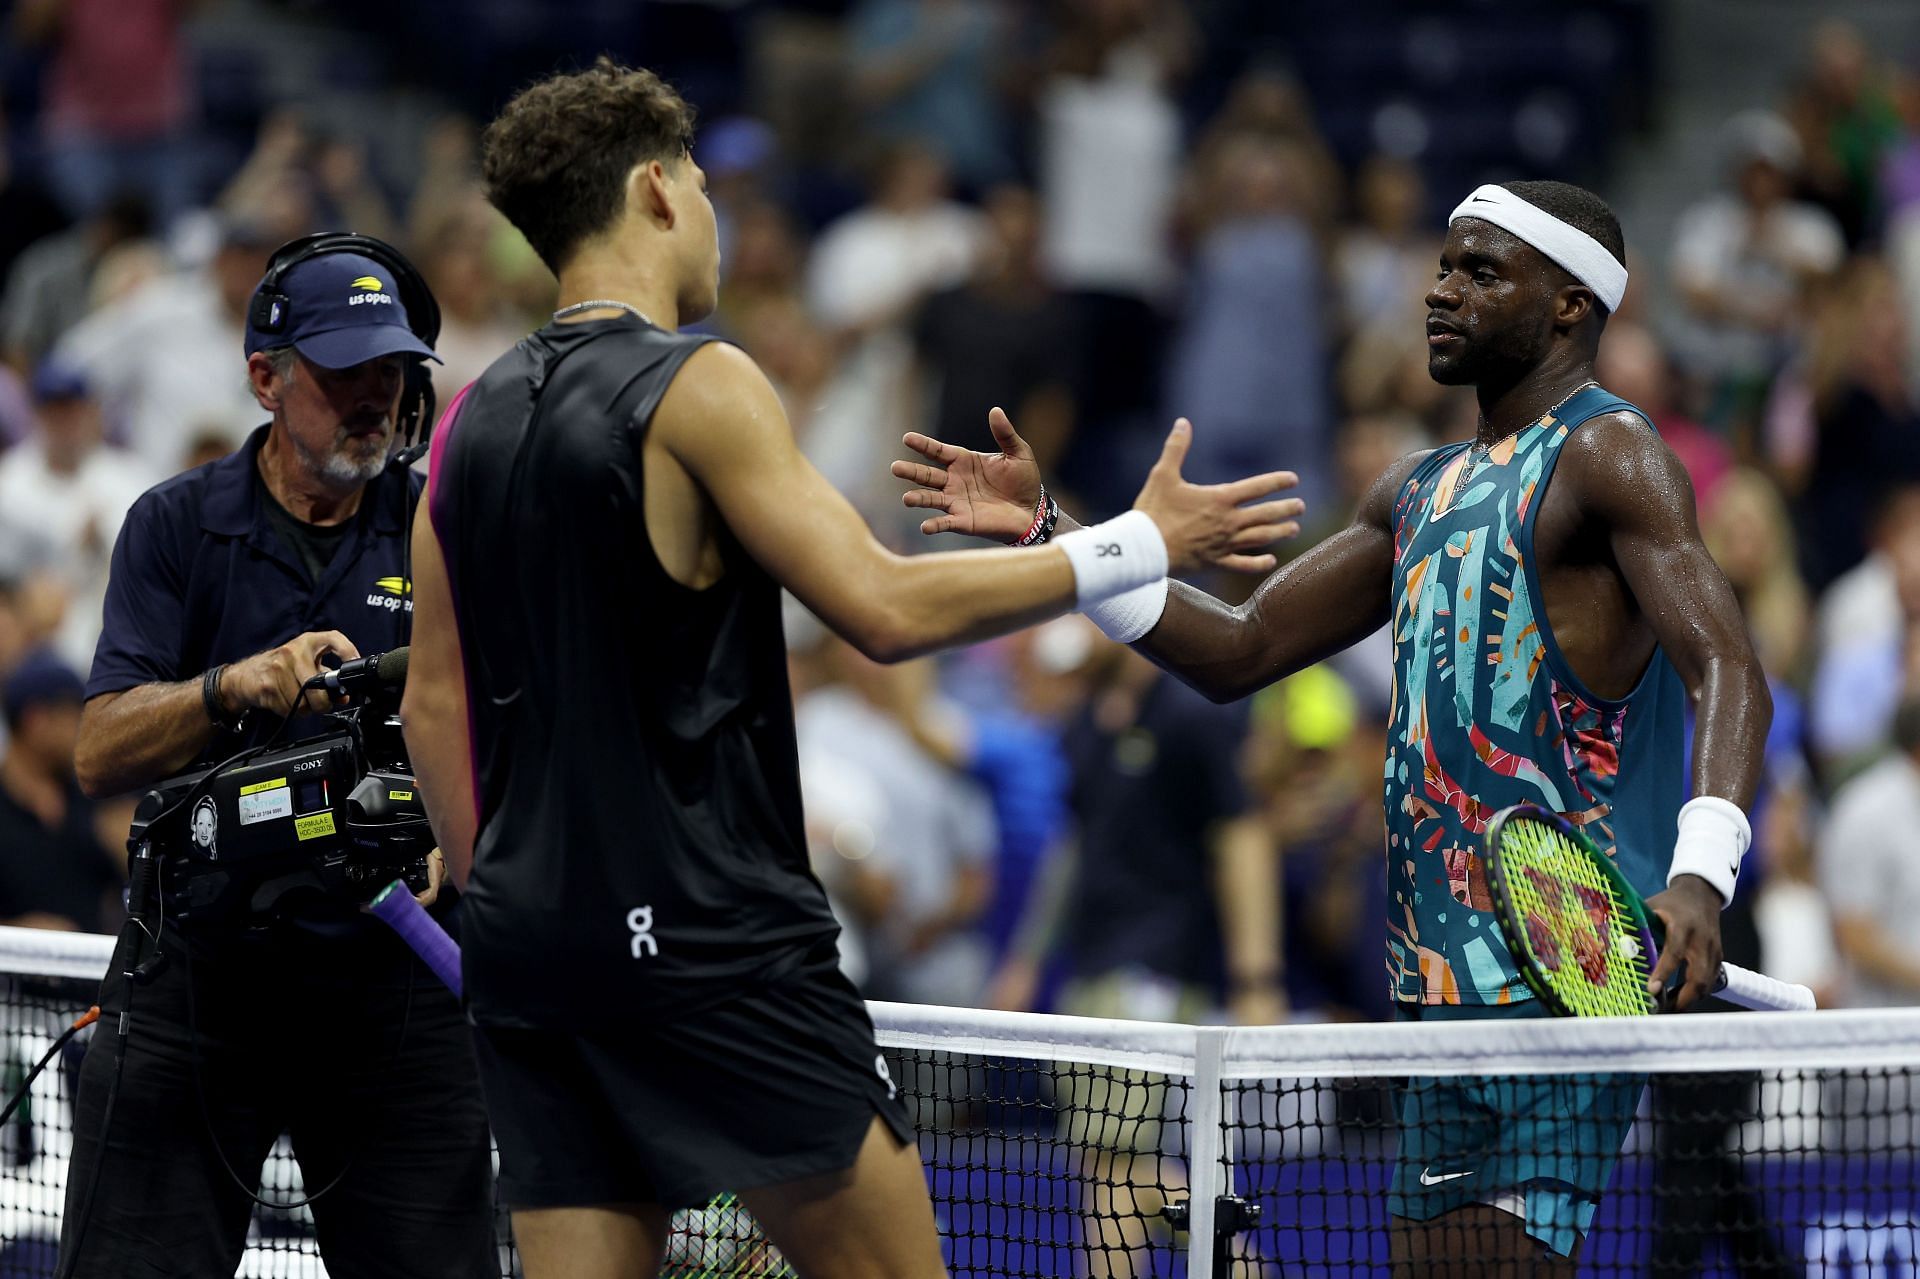 Ben Shelton (L) and Frances Tiafoe (R) at the 2023 US Open